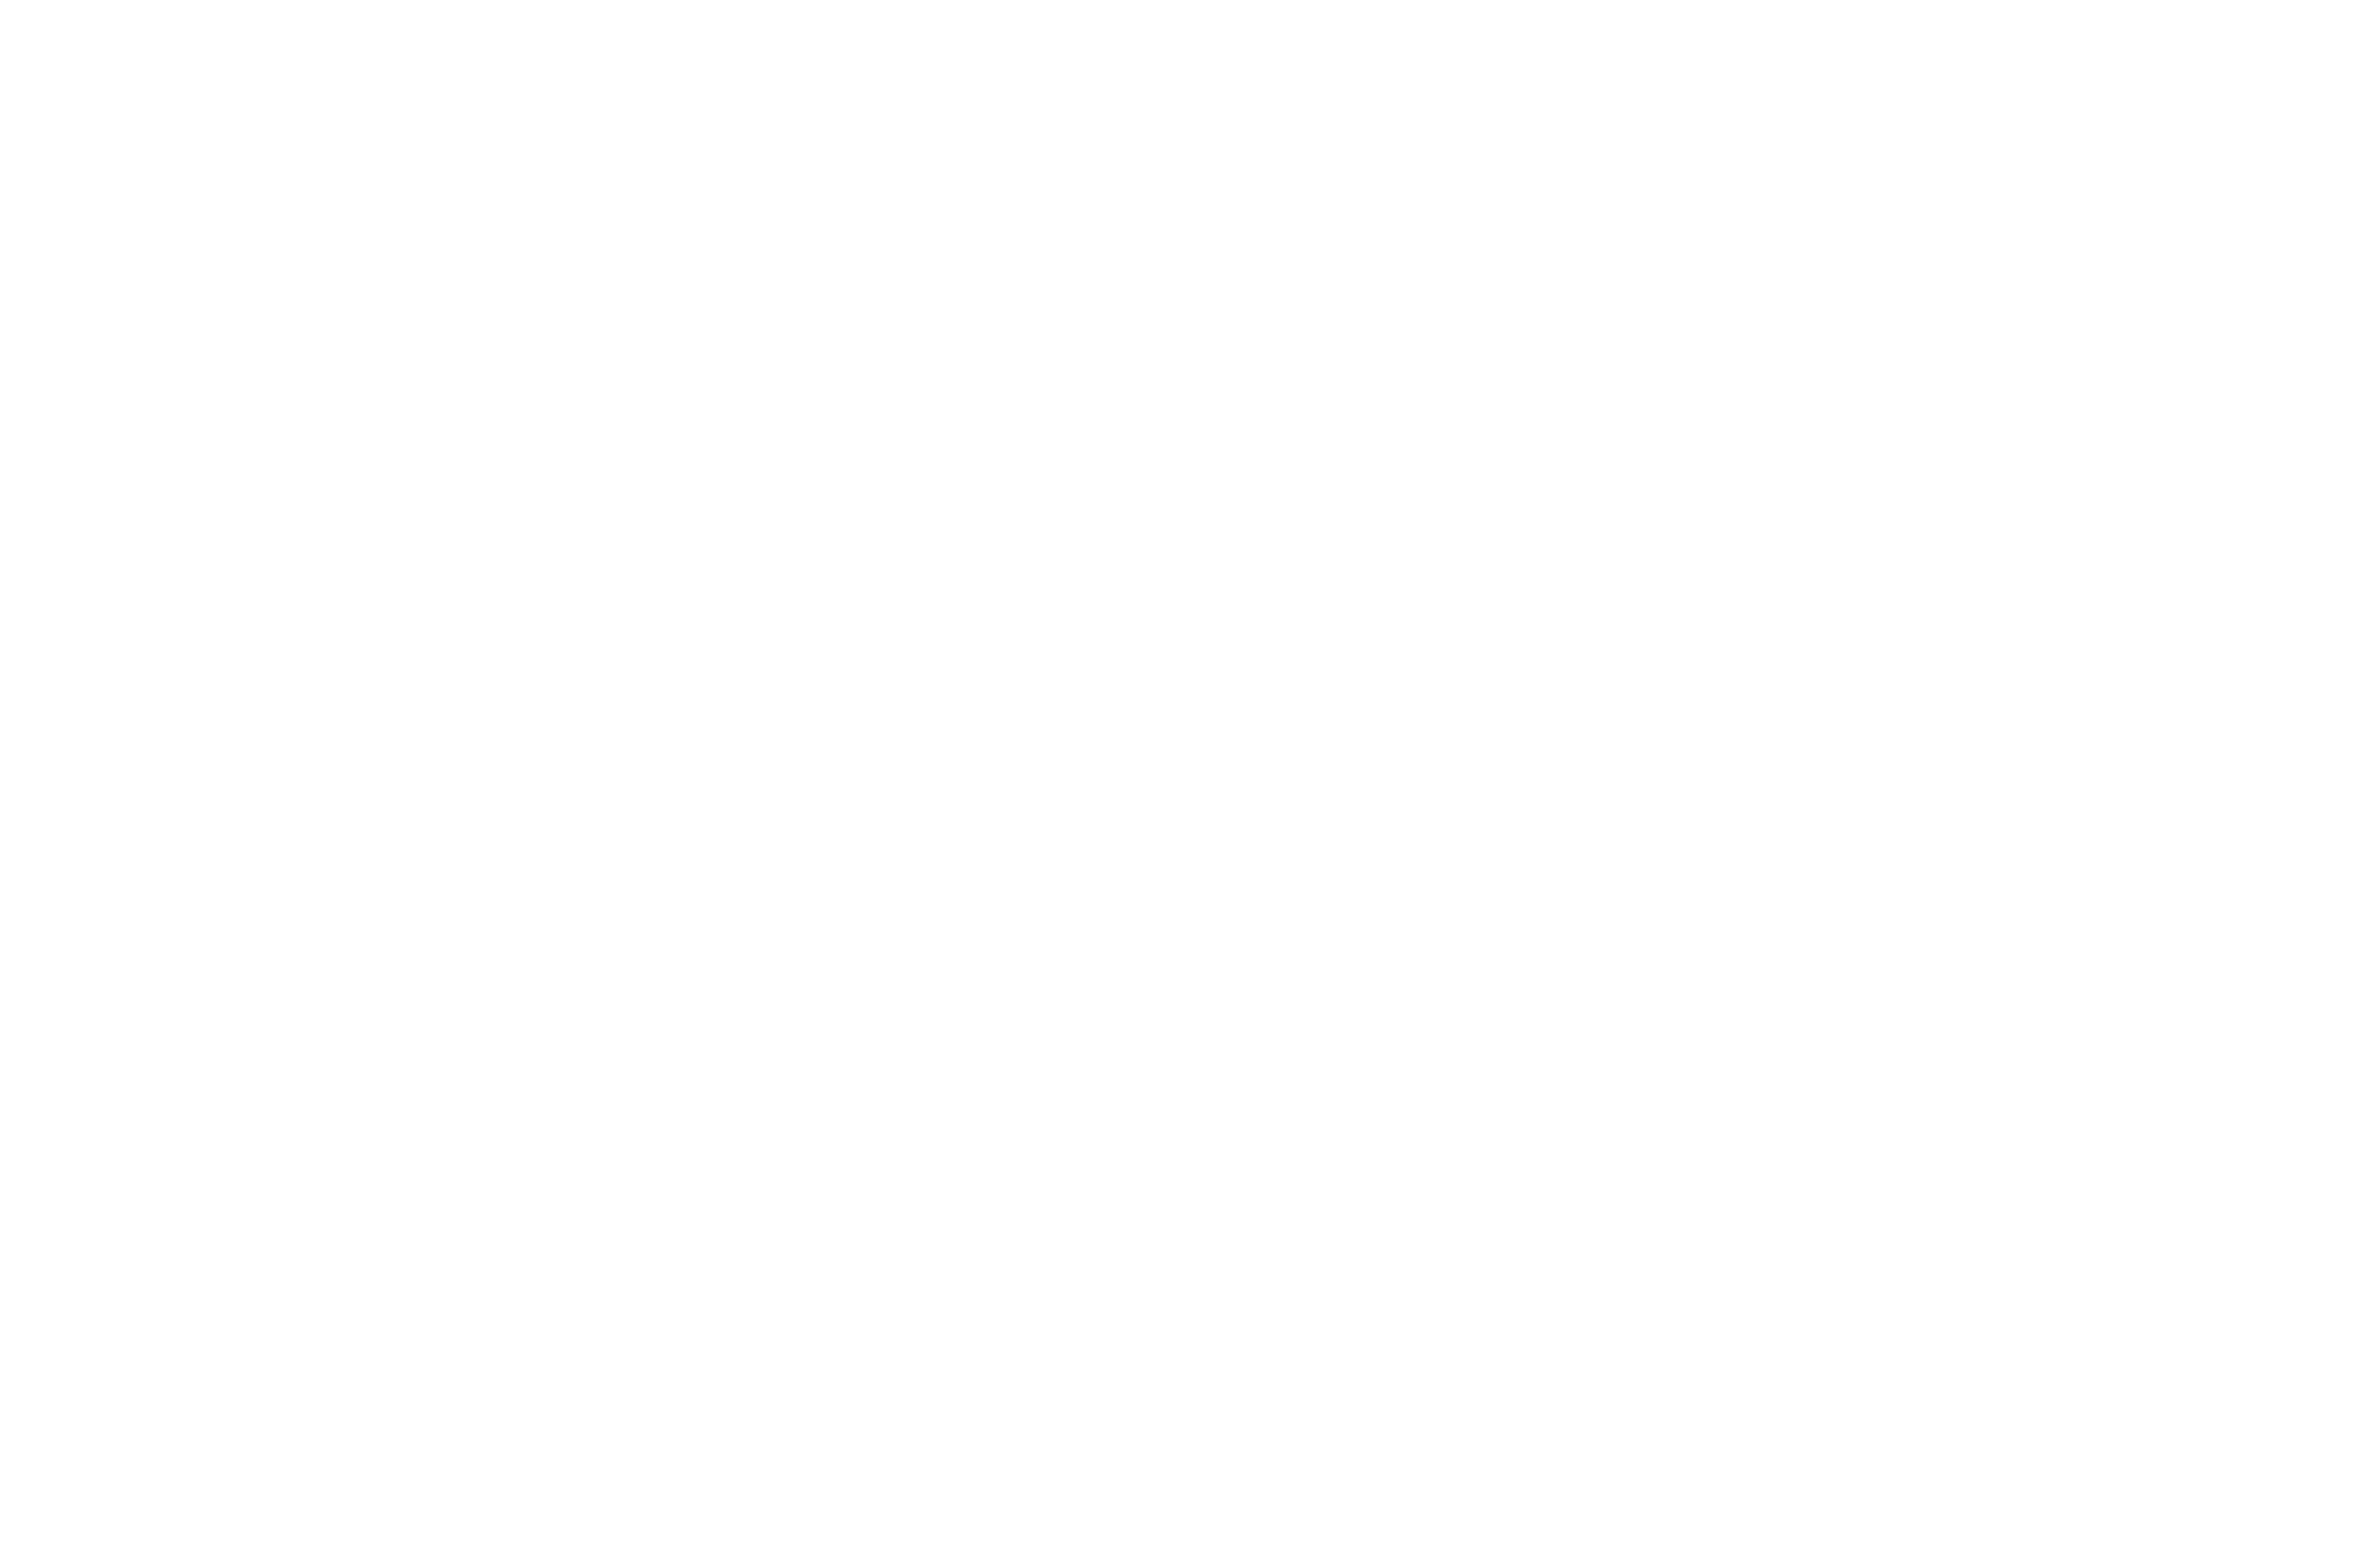 Mobility Finance